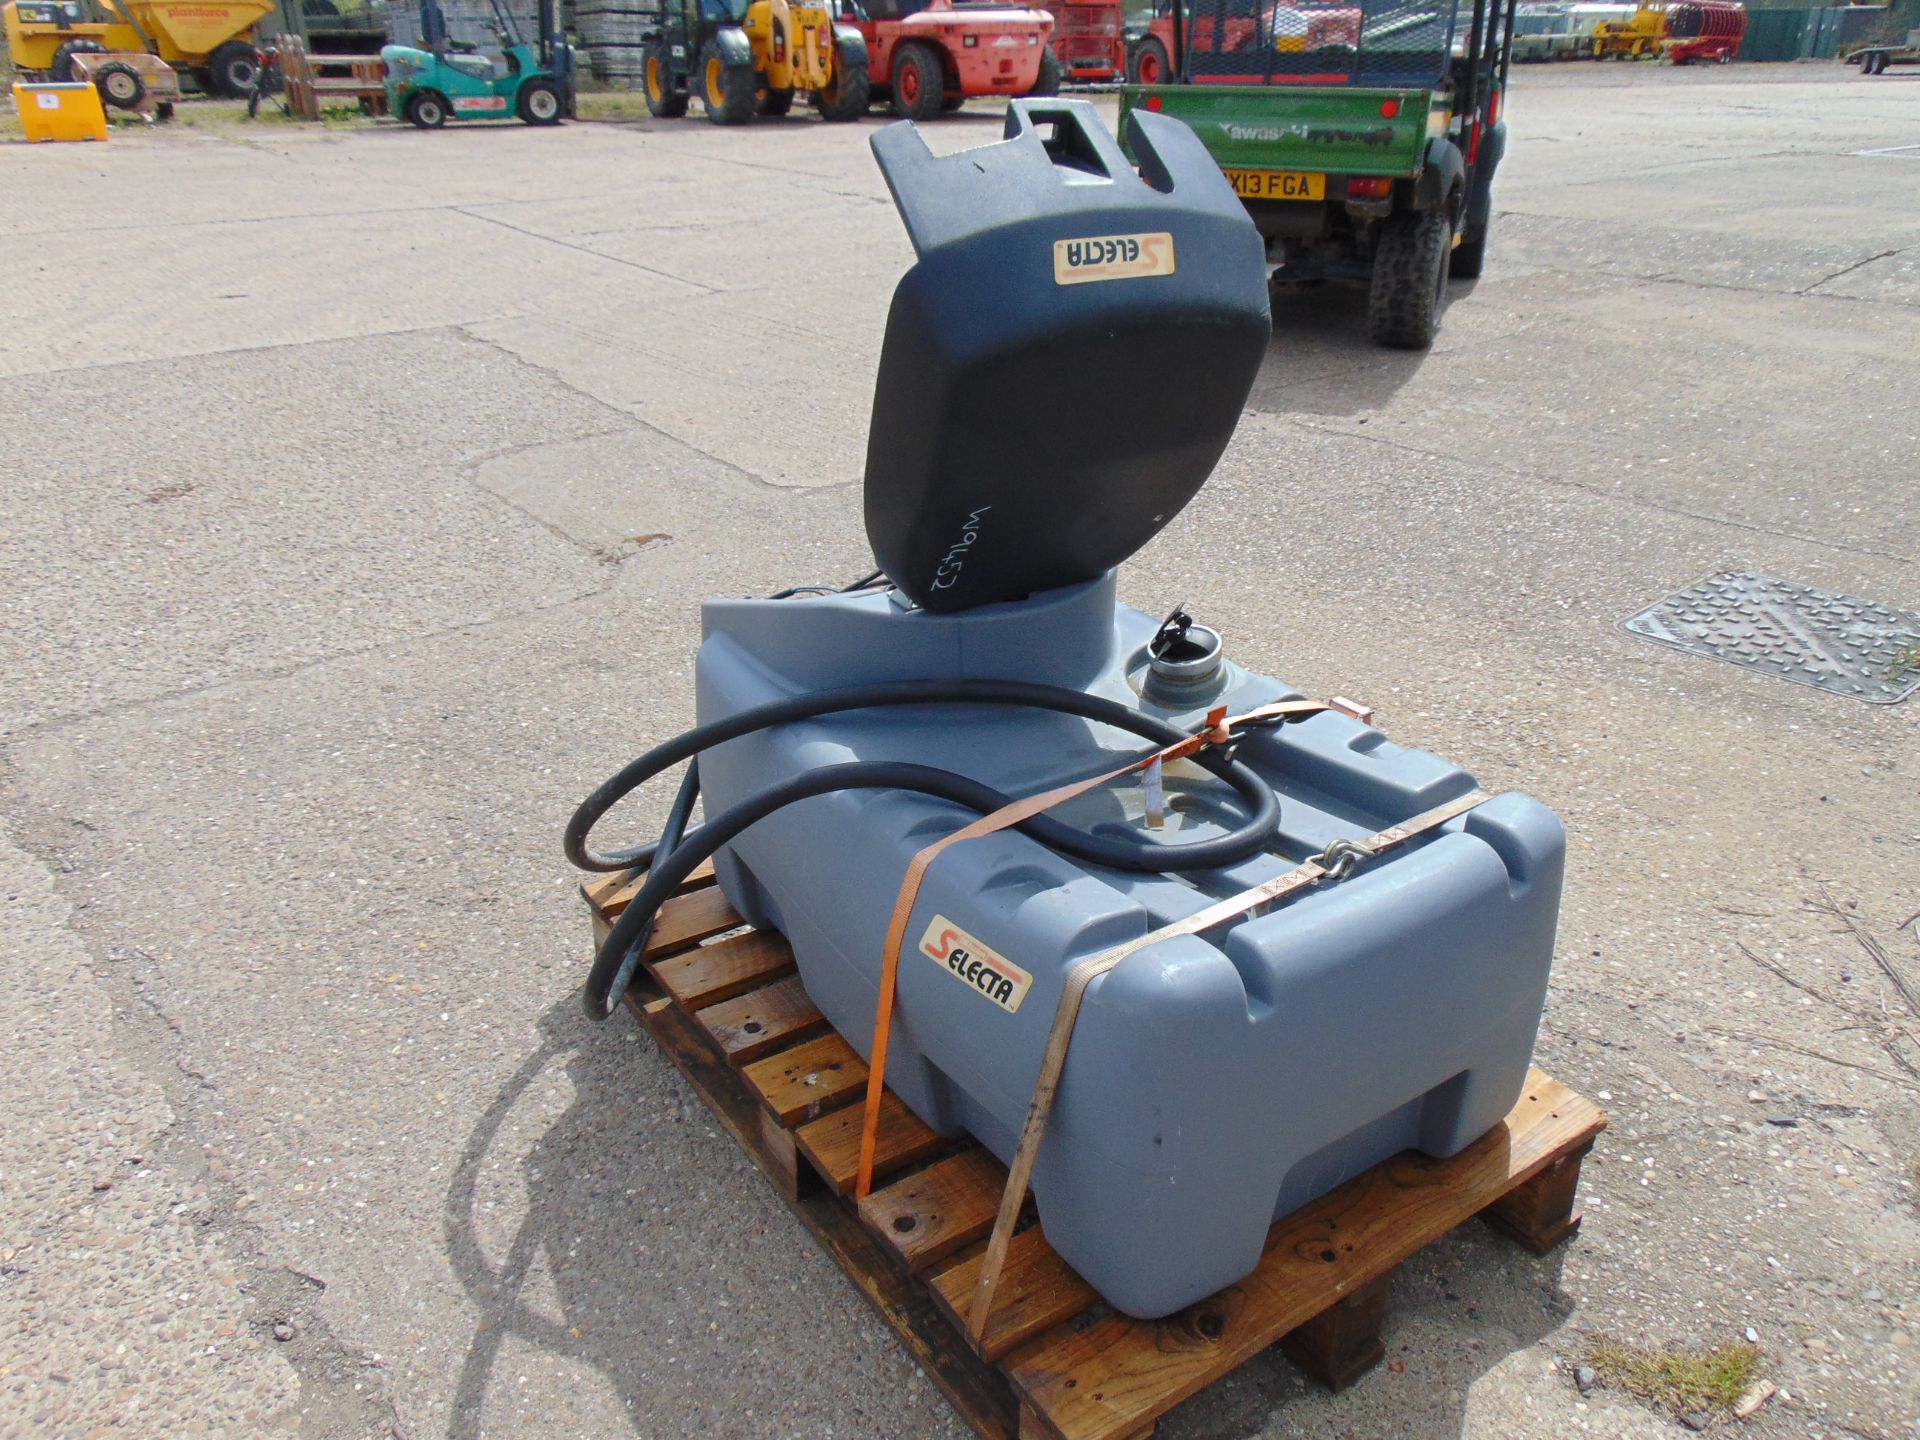 Selecta 200 Litre 50 Gall Portable Refuel Tank c/w 12Volt Pump Hose and Automatic Refuelling Nozzle - Image 5 of 14